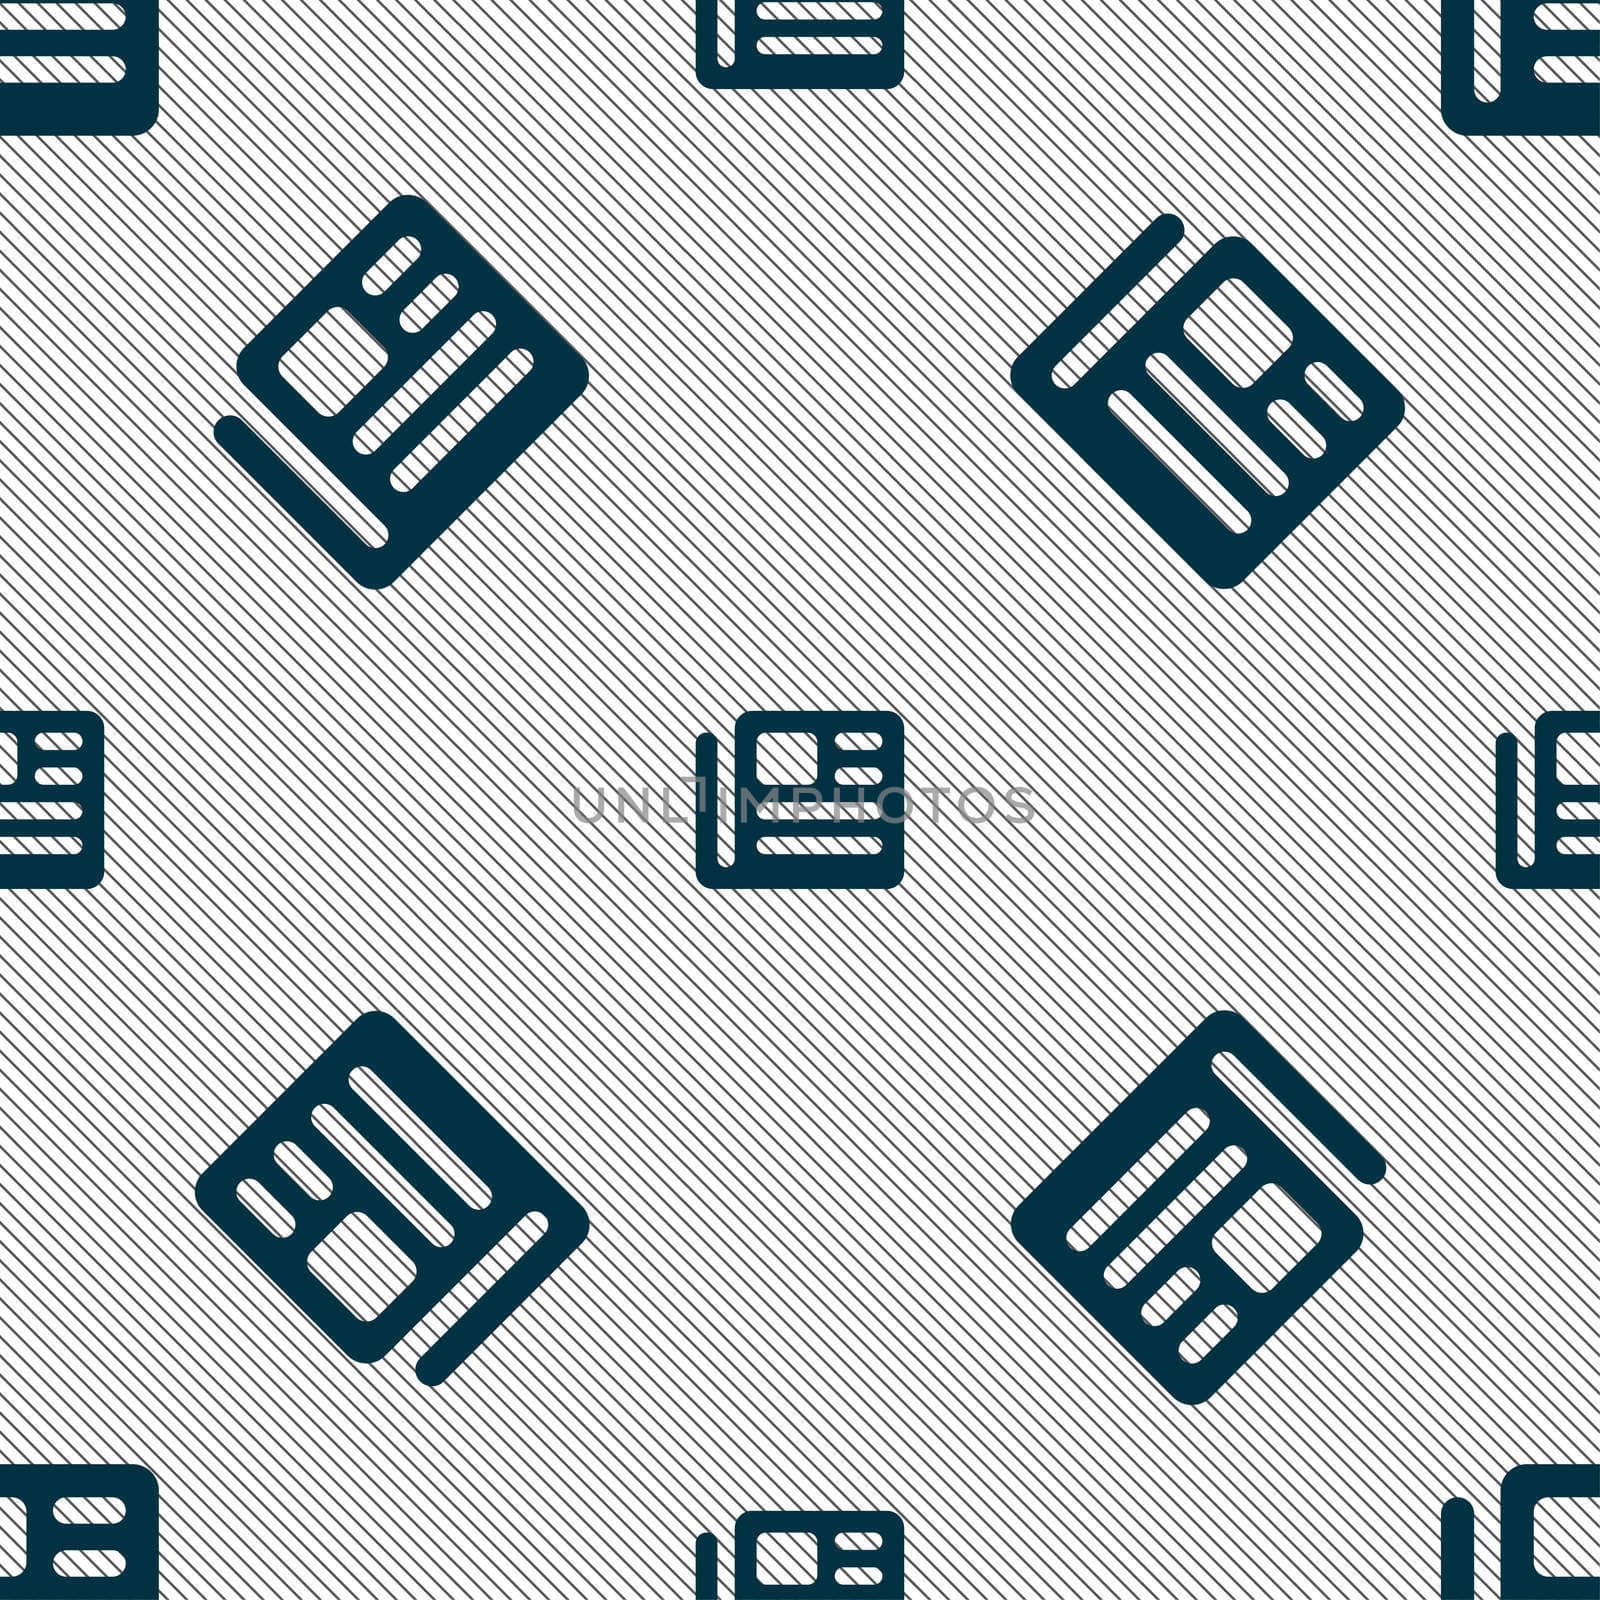 book, newspaper icon sign. Seamless pattern with geometric texture. illustration